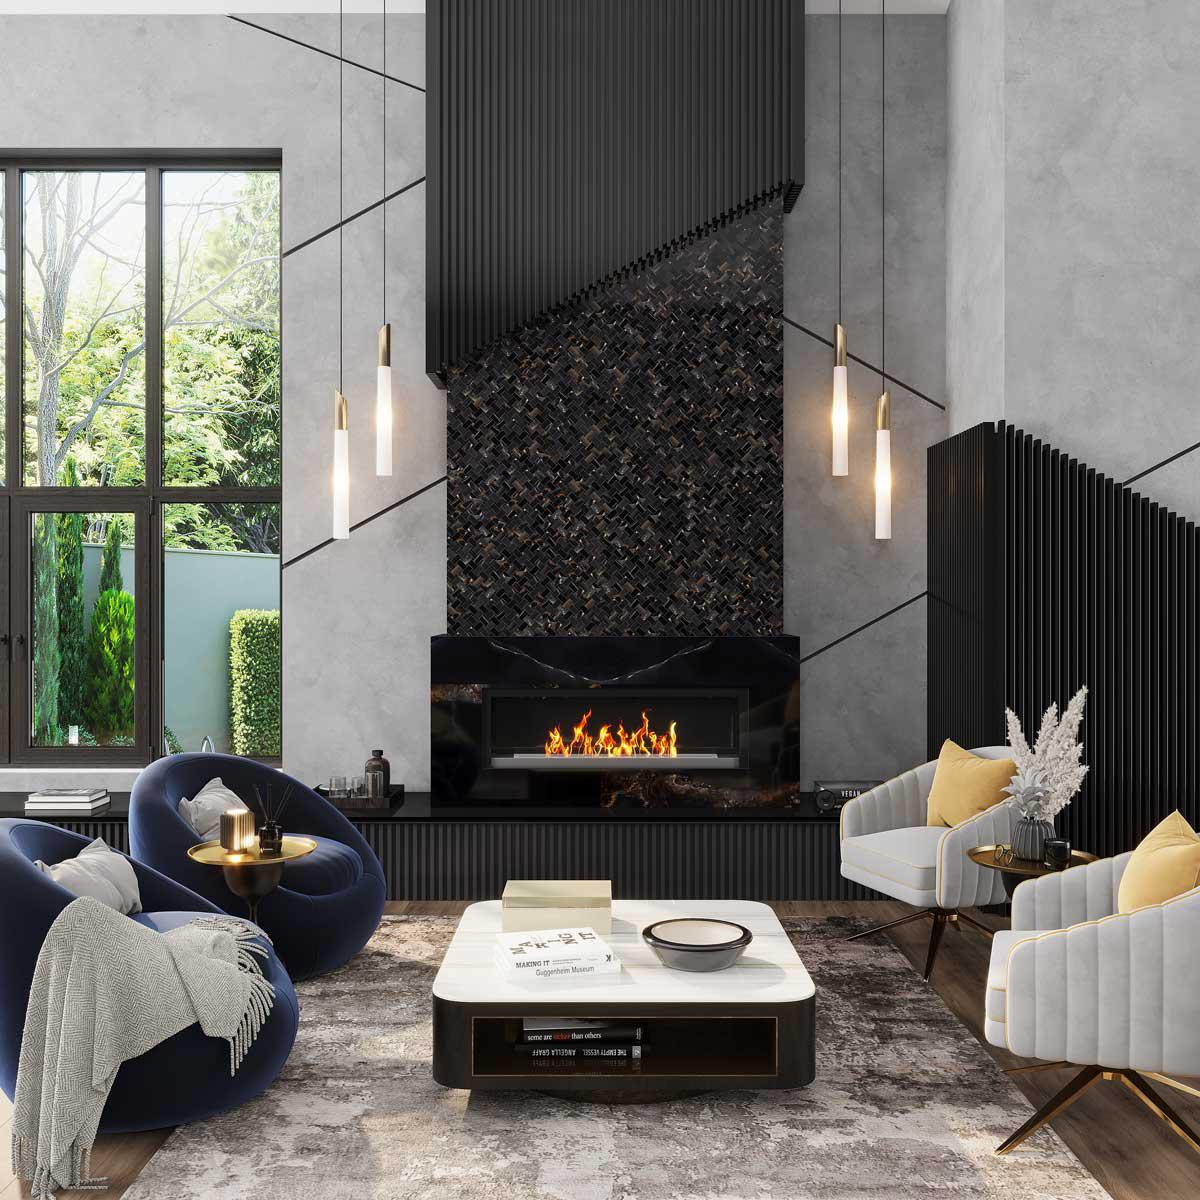 Modern Living room with black onyx mosaic tile fireplace surround